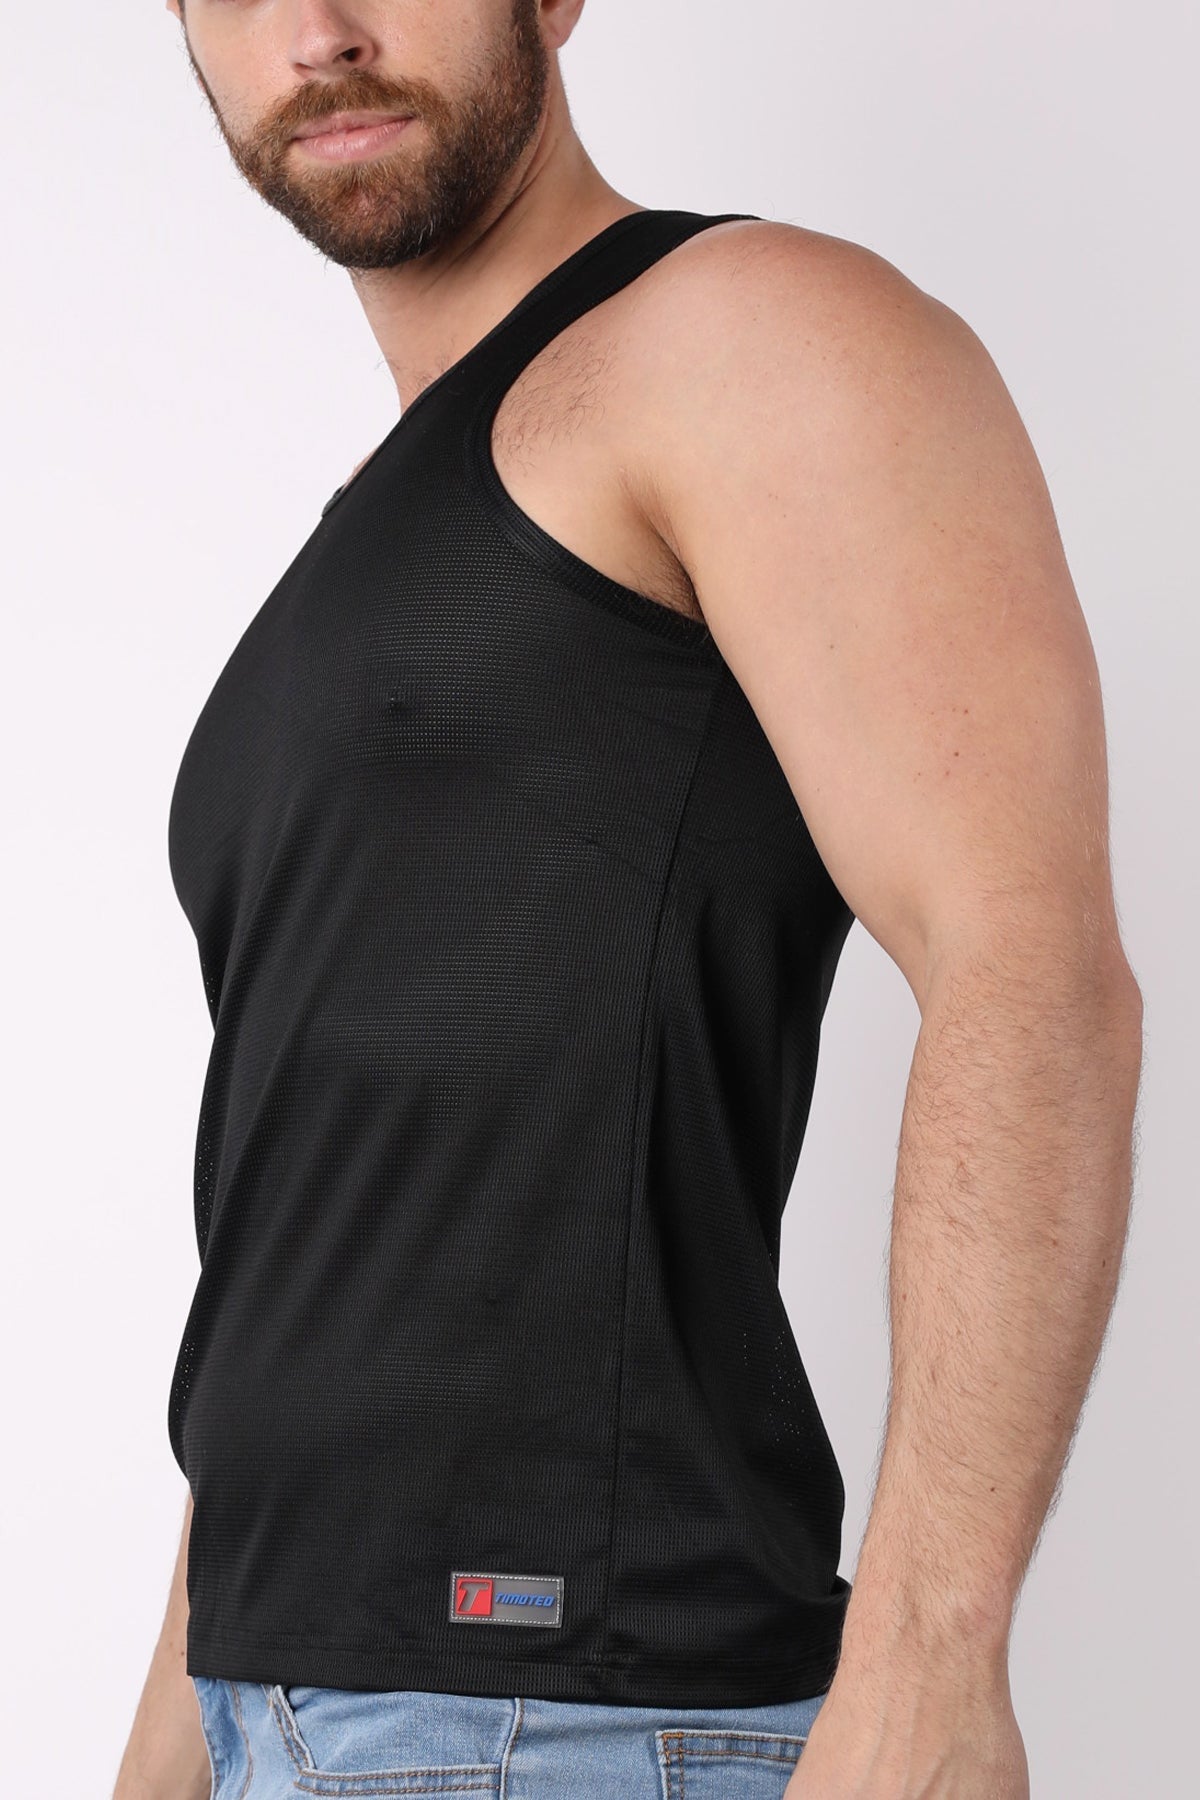 Timoteo solid Black Pool Party Mesh Tank Top